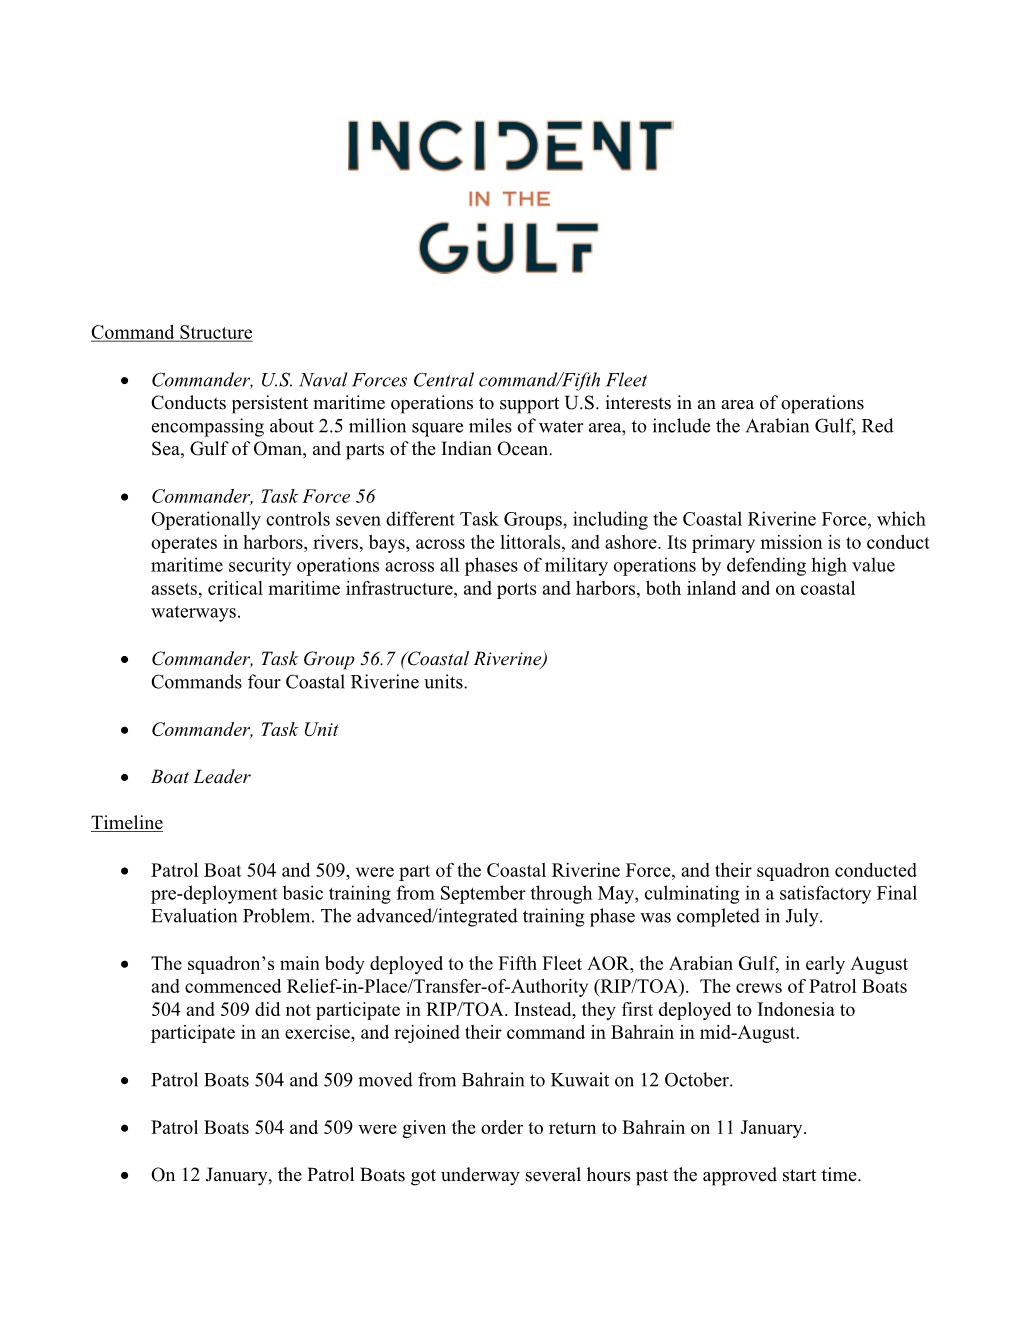 "Incident in the Gulf" Supplementary Materials